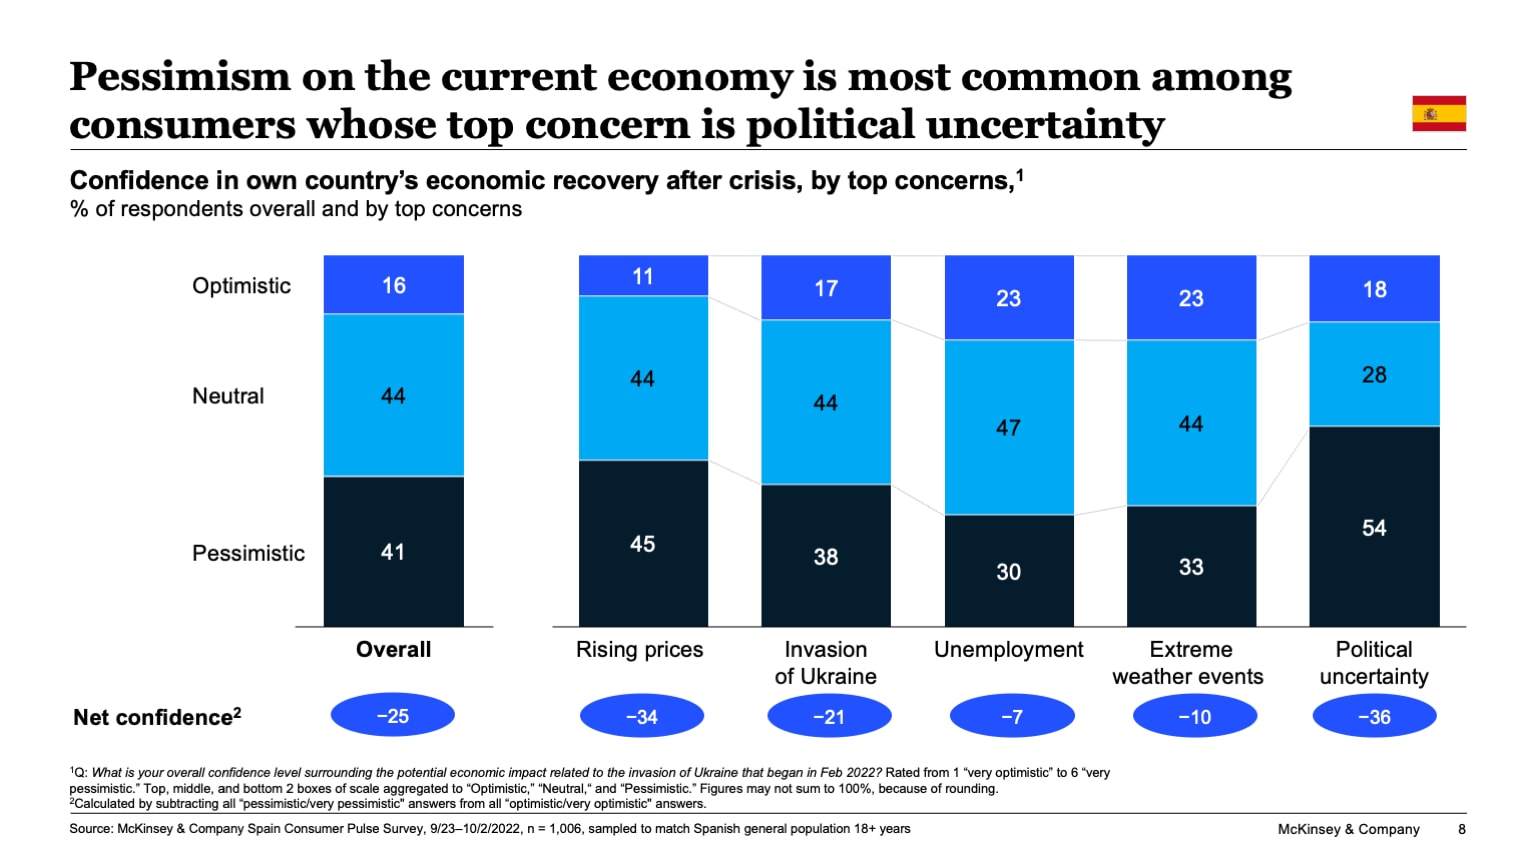 Pessimism on the current economy is most common among consumers whose top concern is political uncertainty